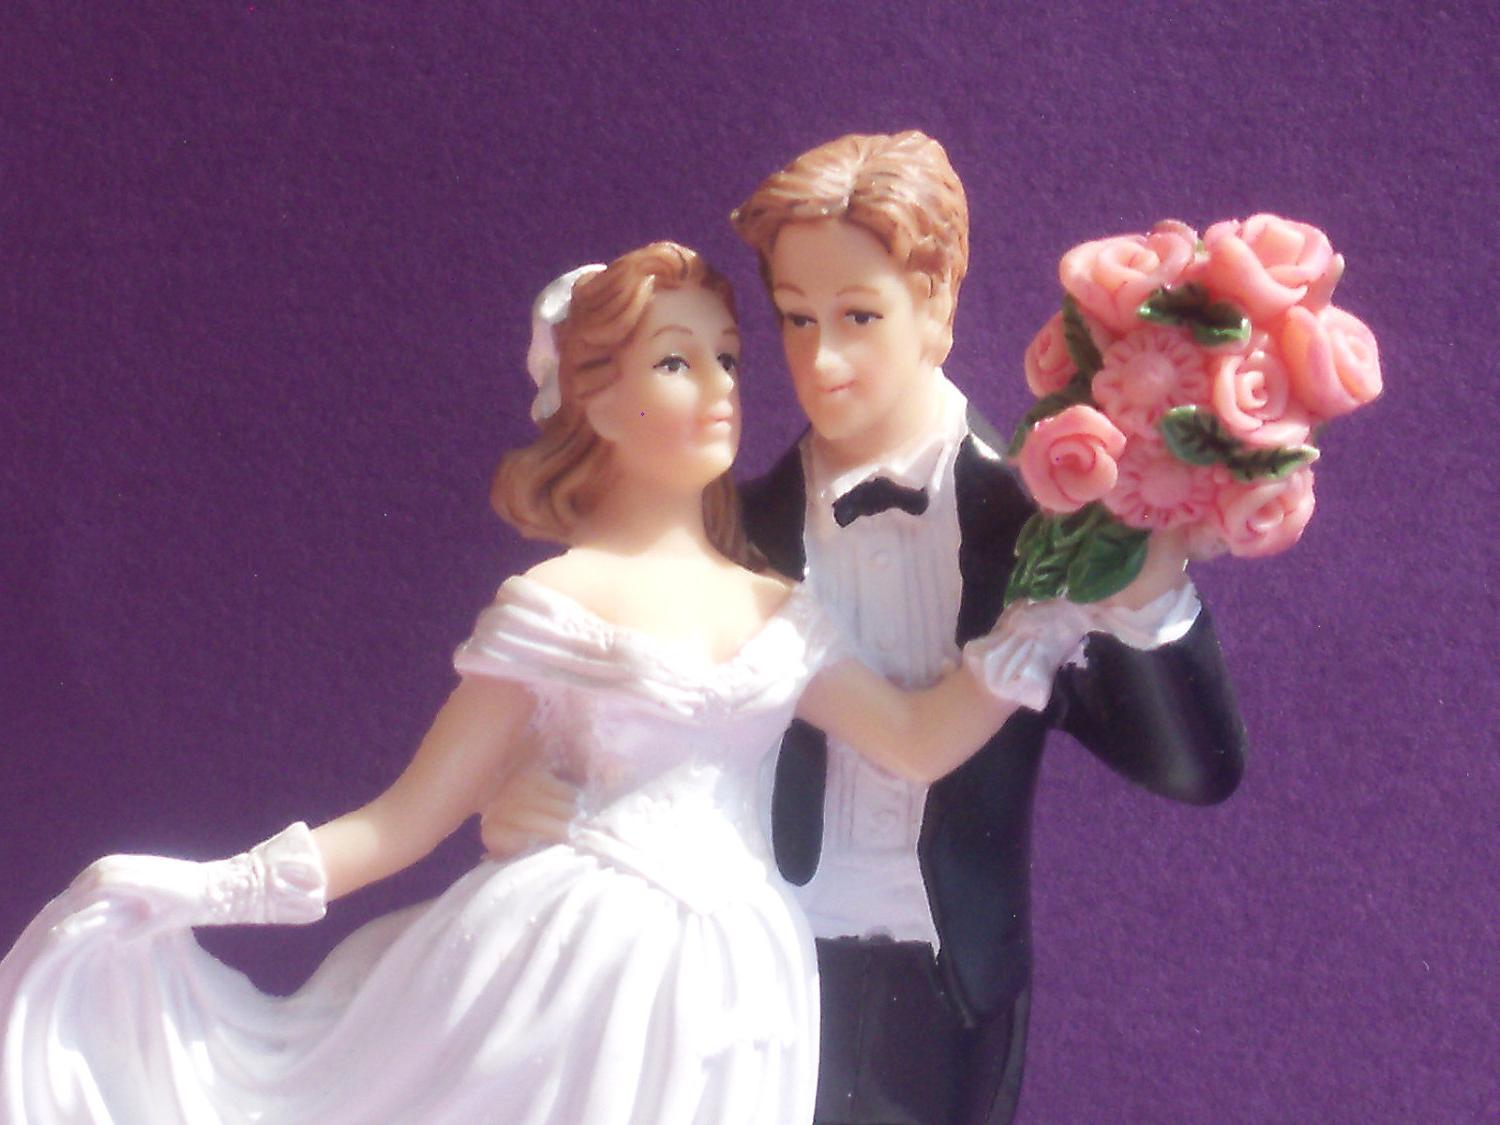 Shall We Dance   Bride and Groom Wedding Cake Topper   New with Box